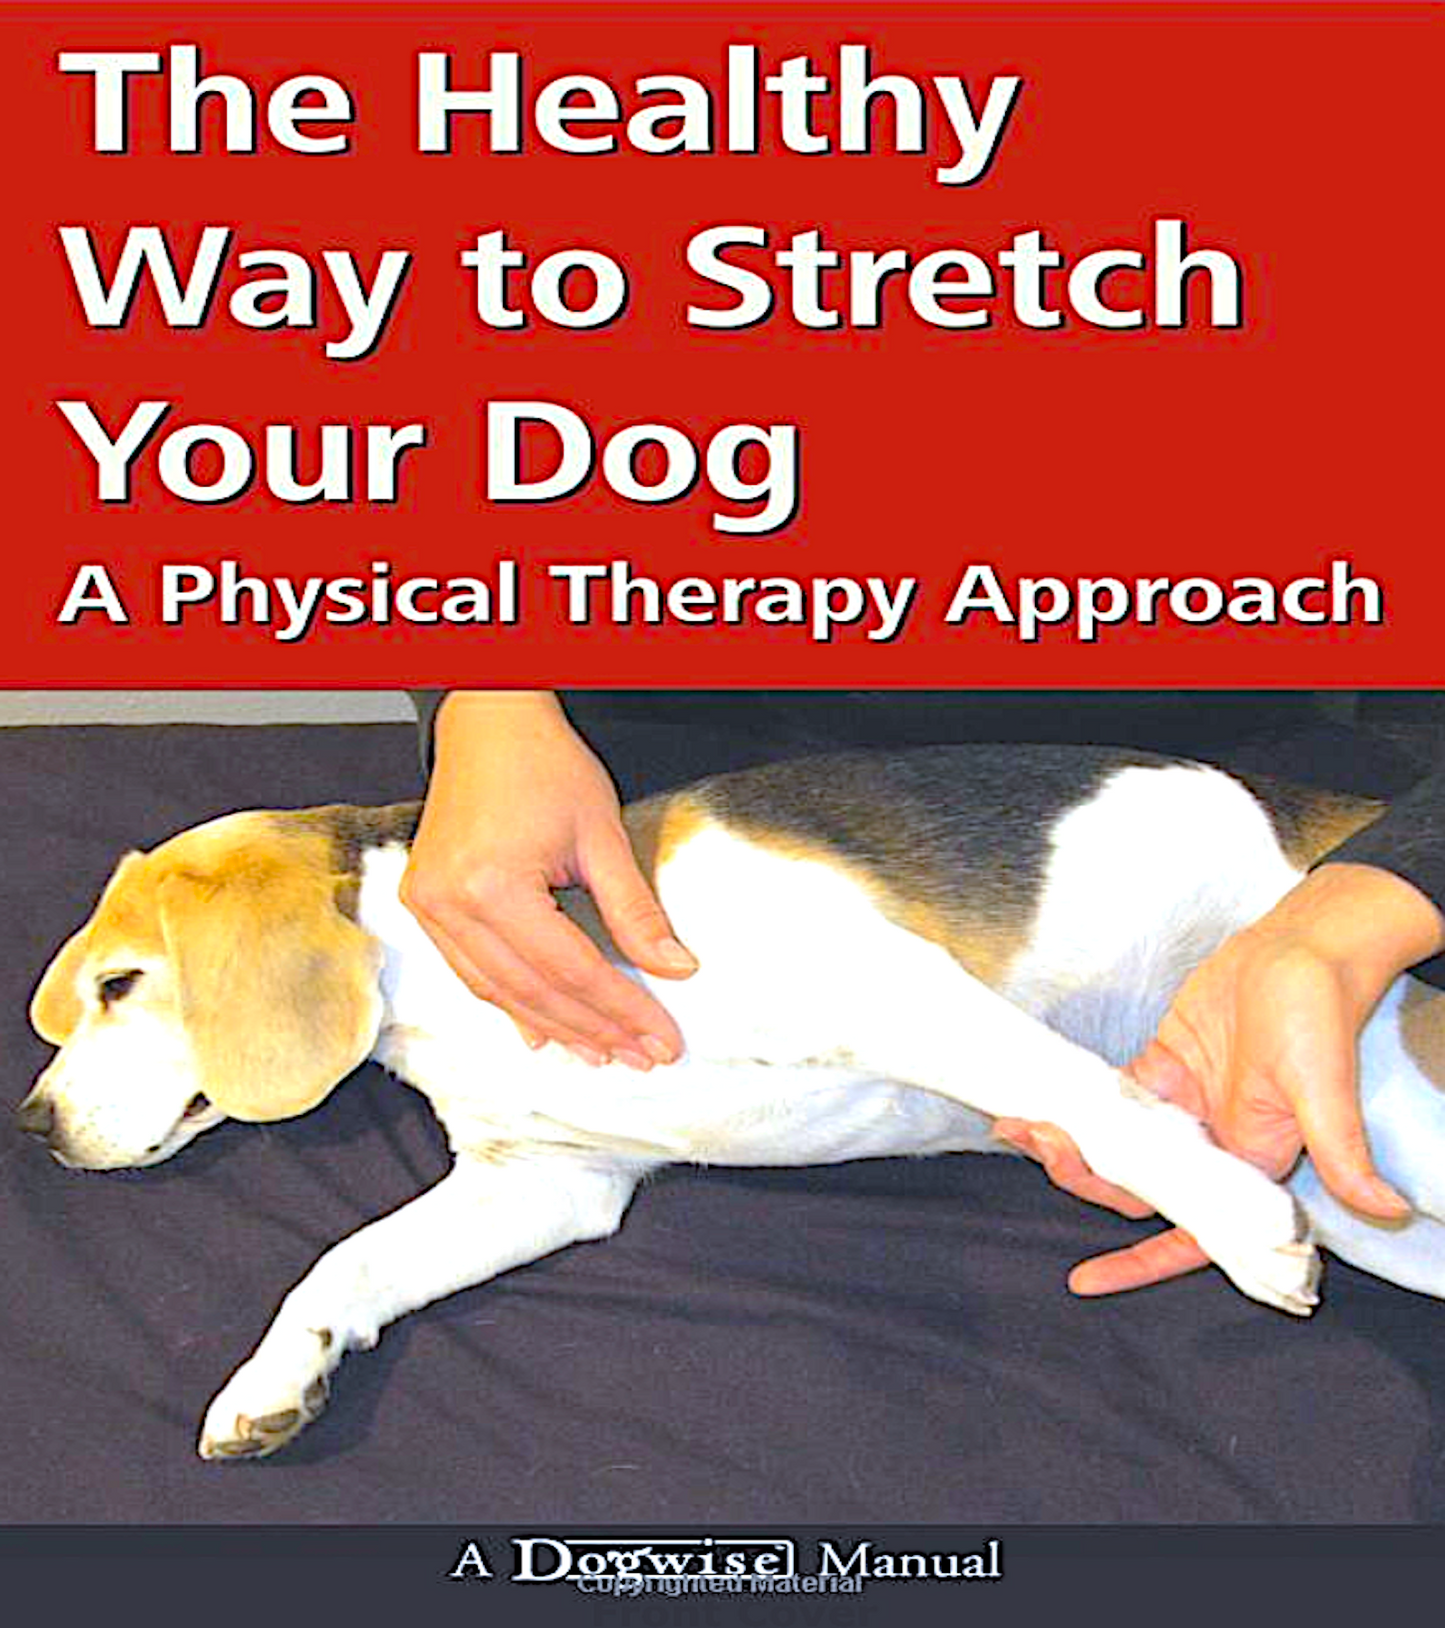 THE HEALTHY WAY TO STRETCH YOUR DOG: a physical therapy approach